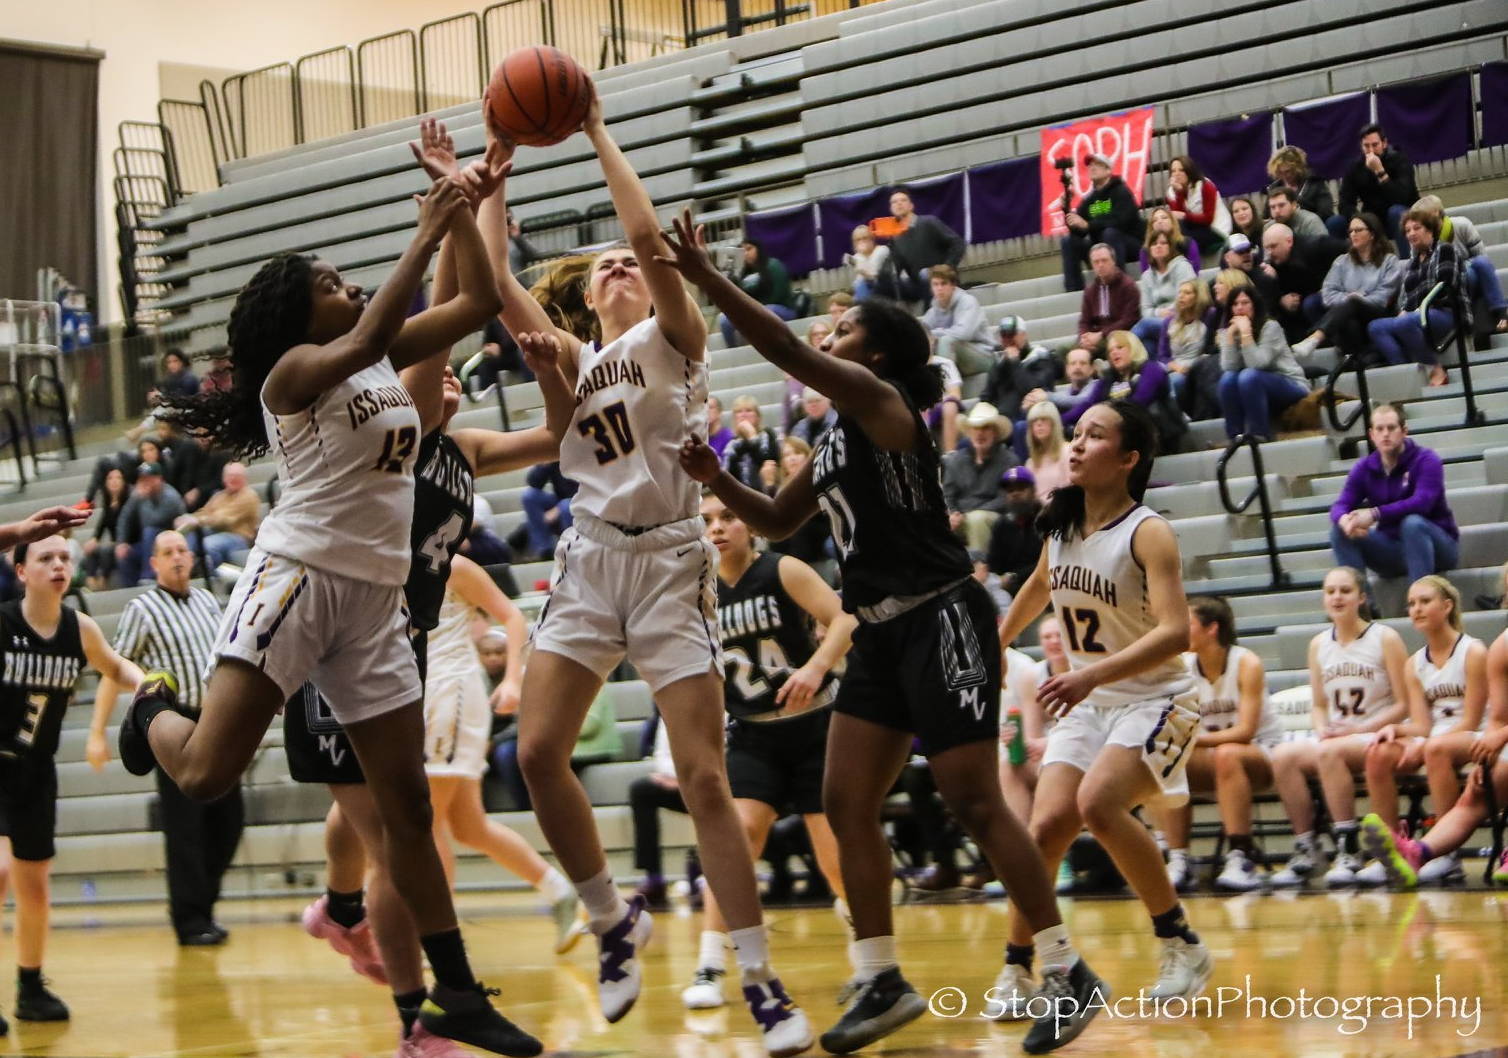 Issaquah freshman Hannah Cameron (#30) had six points and five rebounds during the Eagles’ district playoff victory over the Mount Vernon Bulldogs on Feb. 14 at Issaquah High School. Photo courtesy of Don Borin/Stop Action Photography